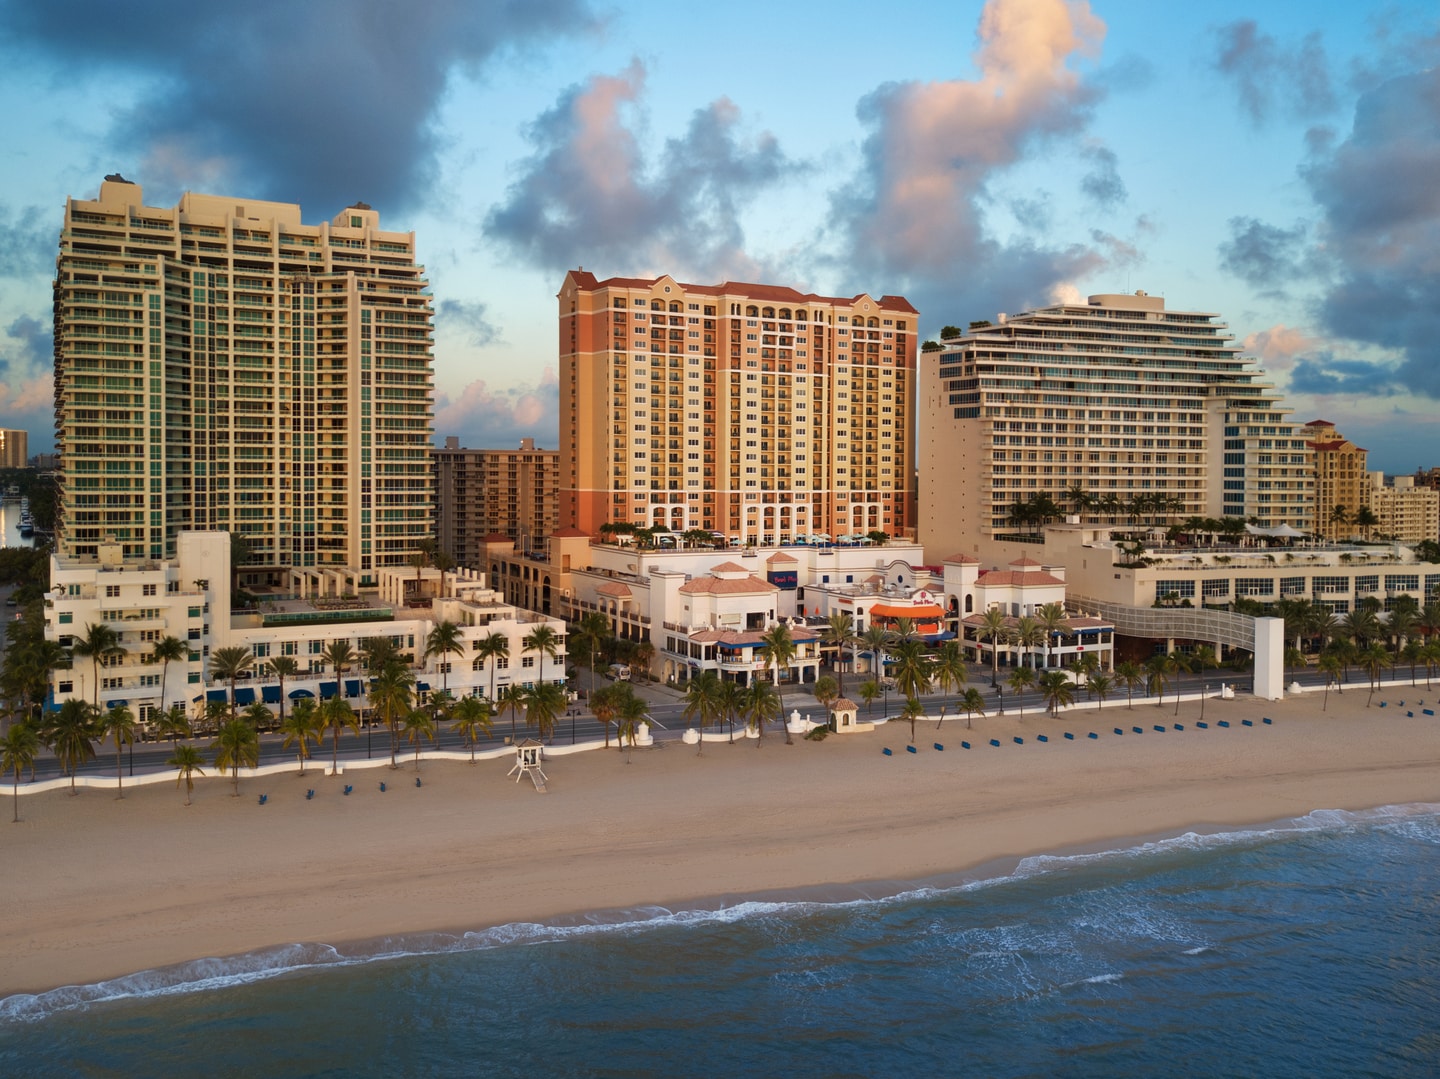 Marriott's BeachPlace Towers Exterior Aerial View. Marriott's BeachPlace Towers is located in Fort Lauderdale, Florida United States.